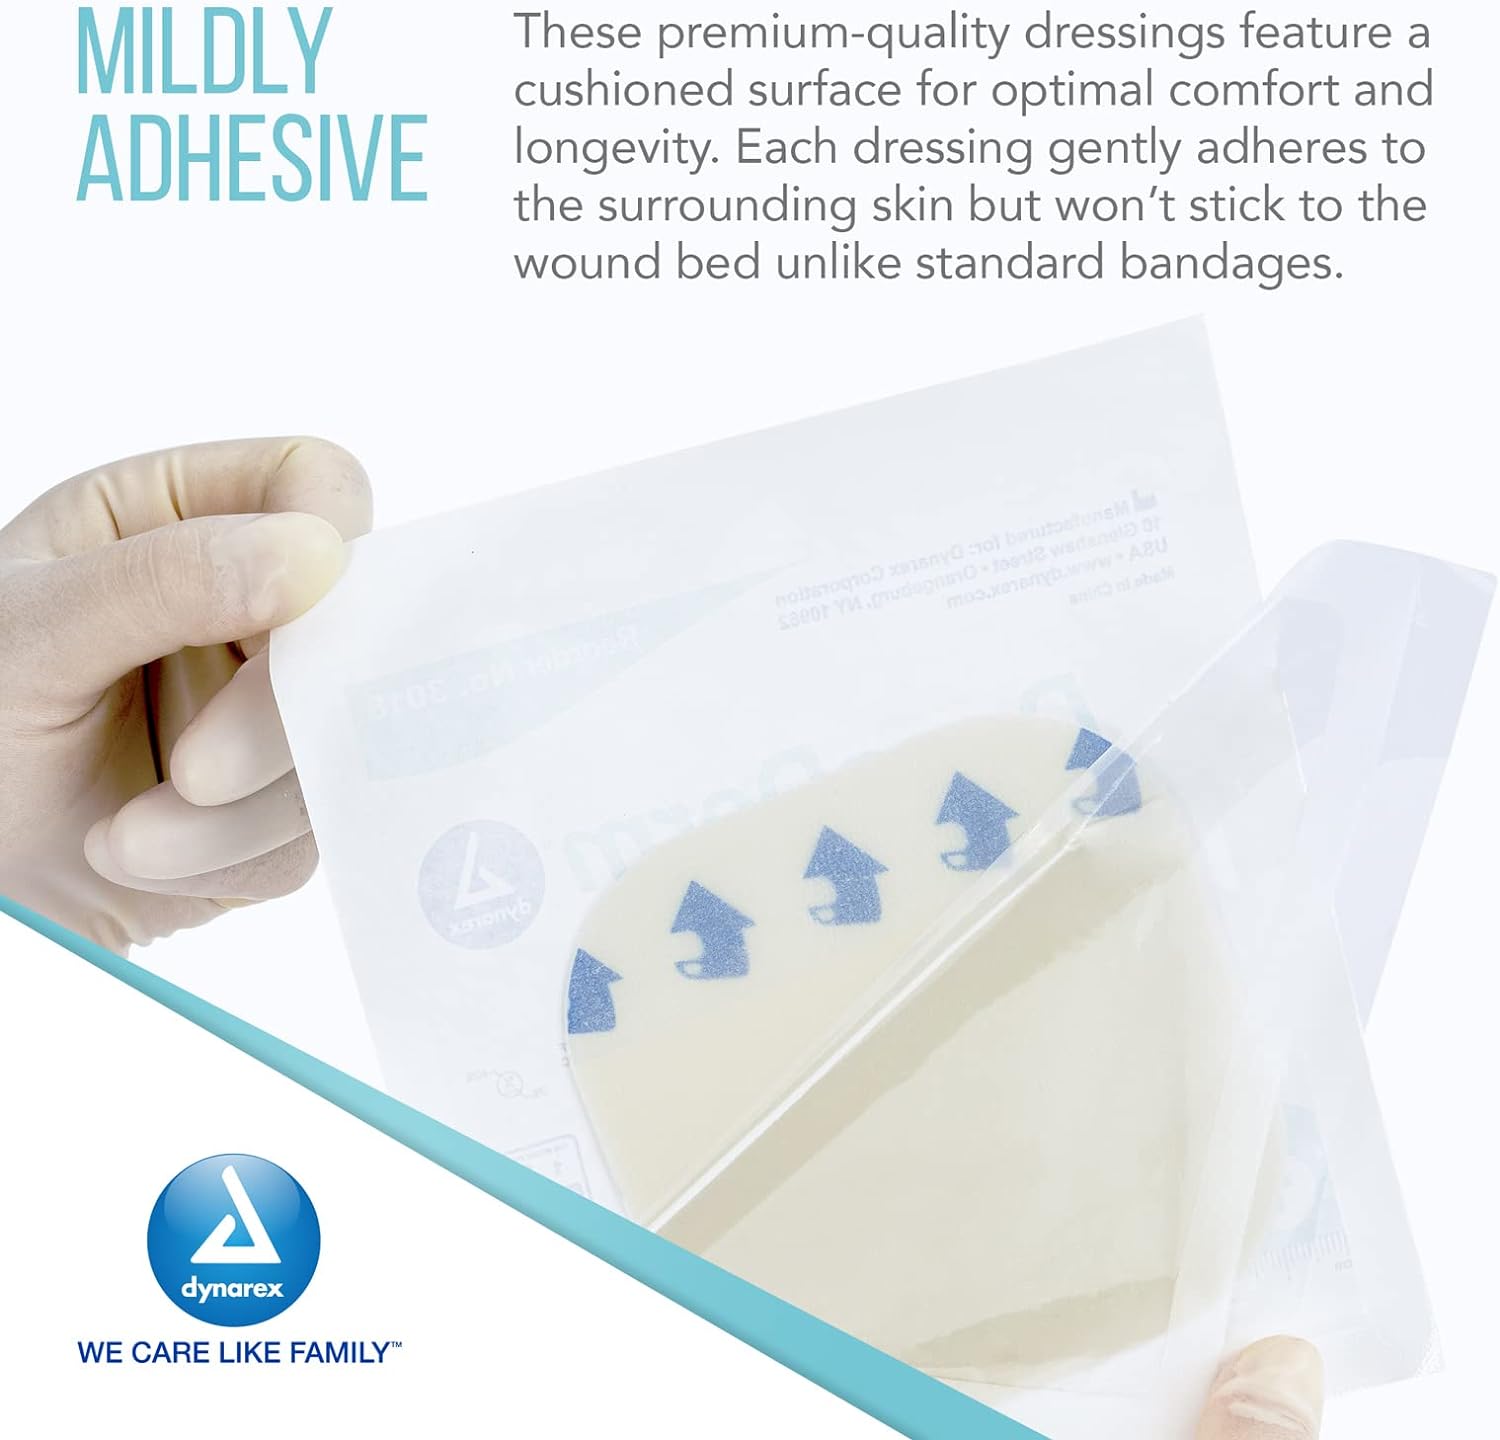 Dynarex DynaDerm Hydrocolloid Dressings, Sterile Moist Bandages Used for All Kinds of Wounds, 4" x 4", X-Thin & Latex-Free, Peel-Down Patches - 2 Boxes of 10 Dressings